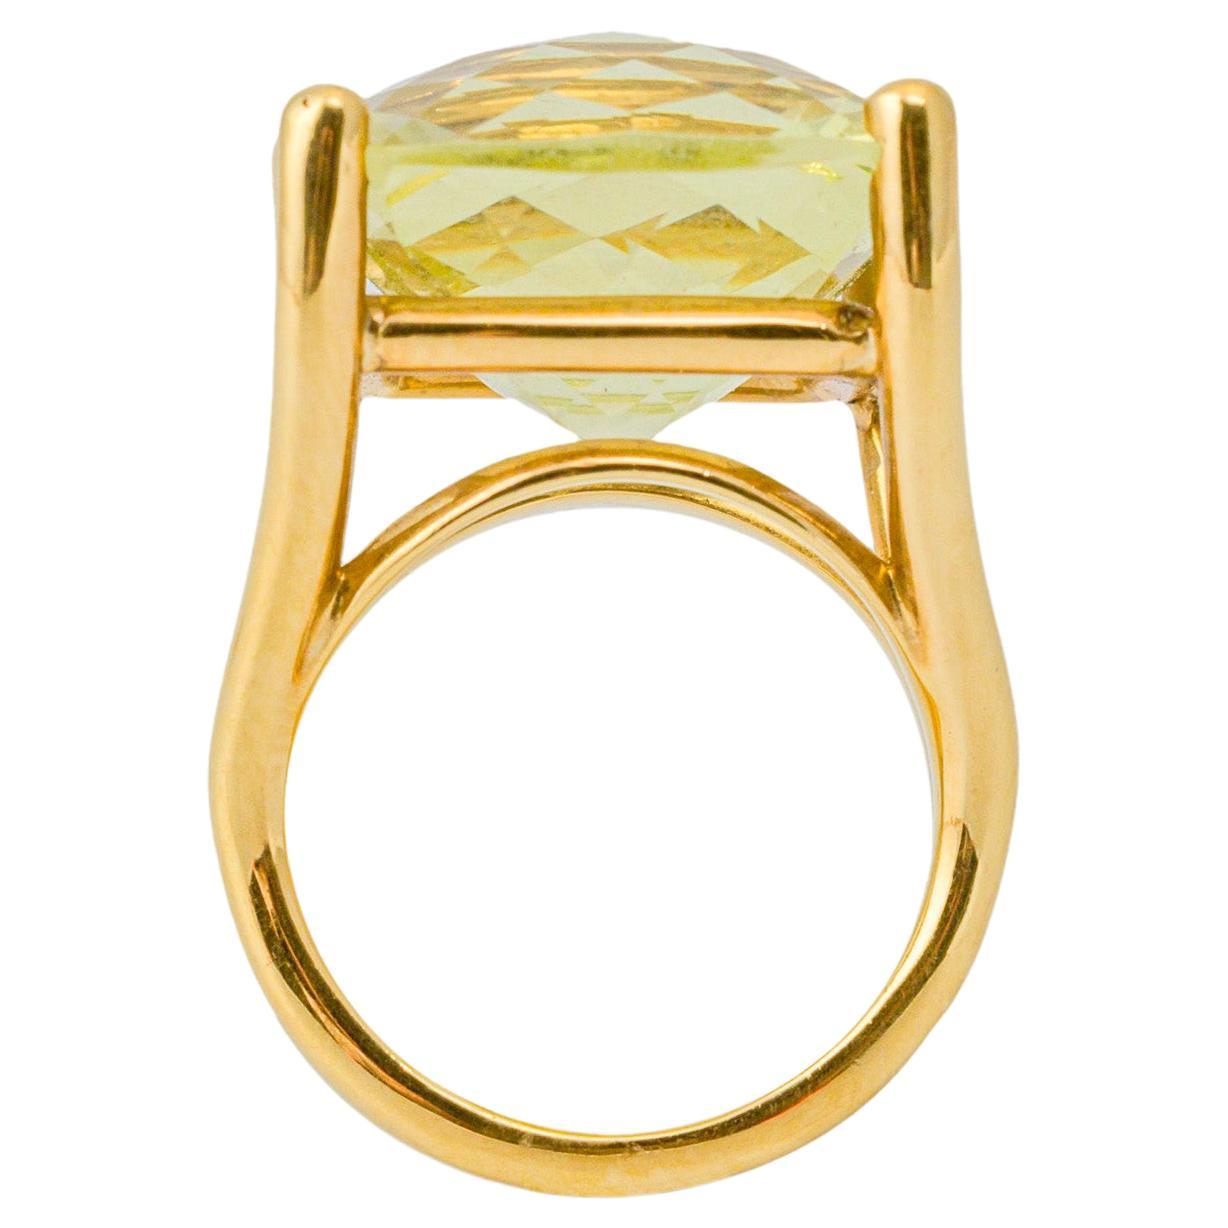 "Costis" Stone on Wire Ring with 21.68 carats Cushion-cut Lemon Quartz